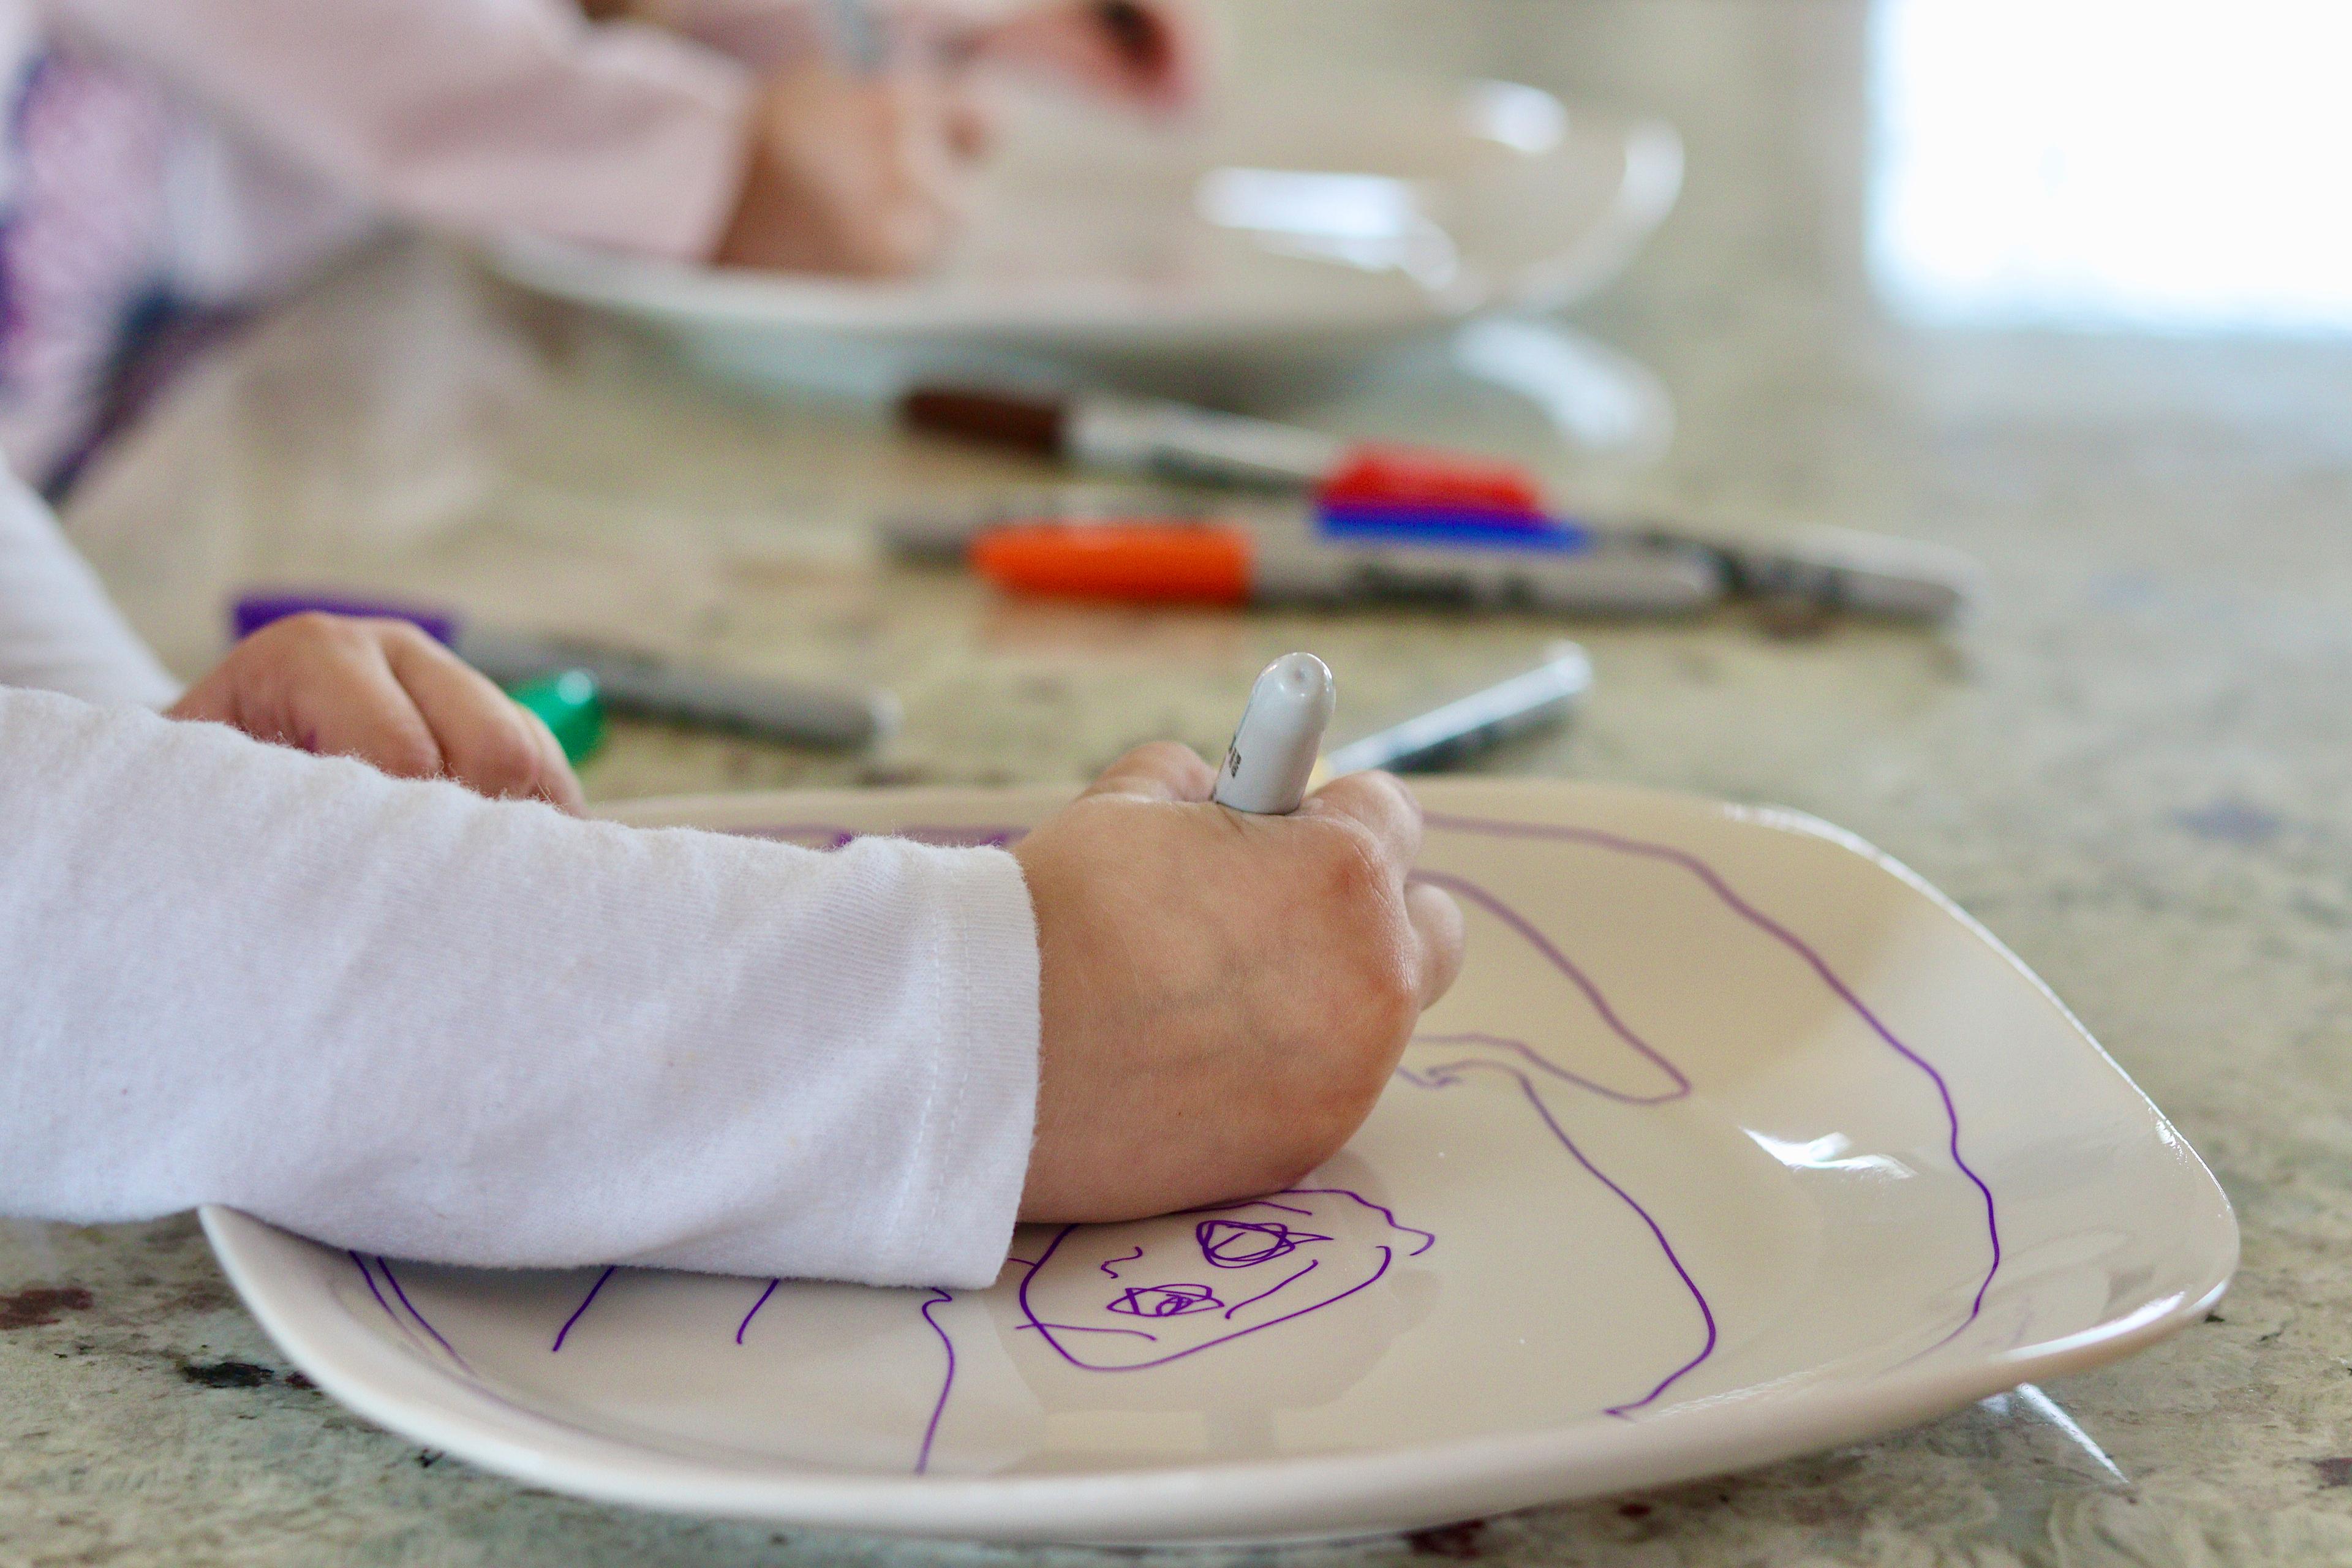 A girl colors a plate with a marker.